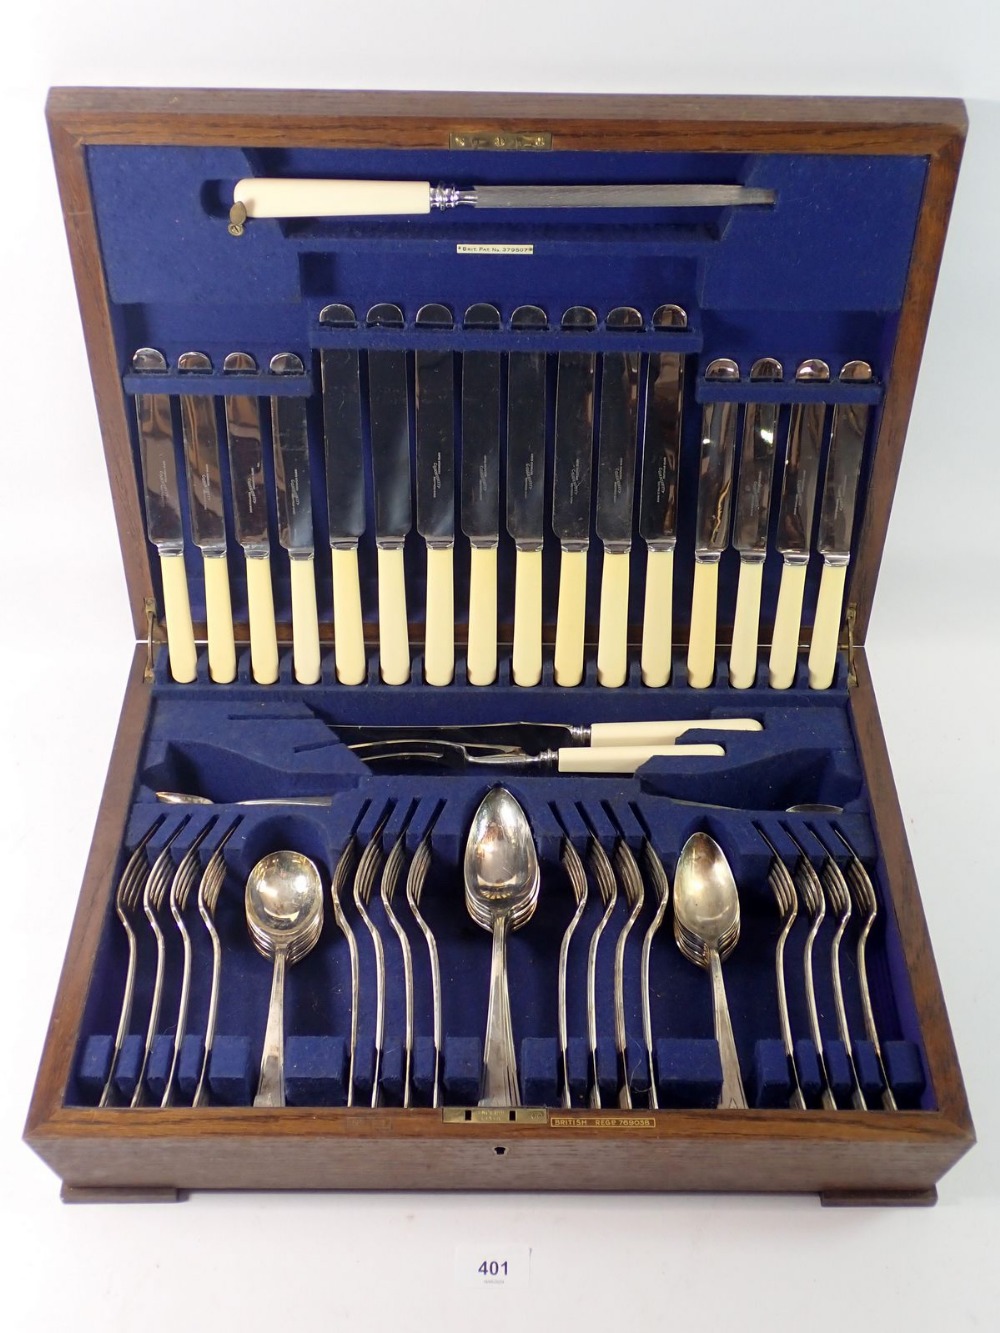 A Community Plate Art Deco eight place cutlery set, boxed